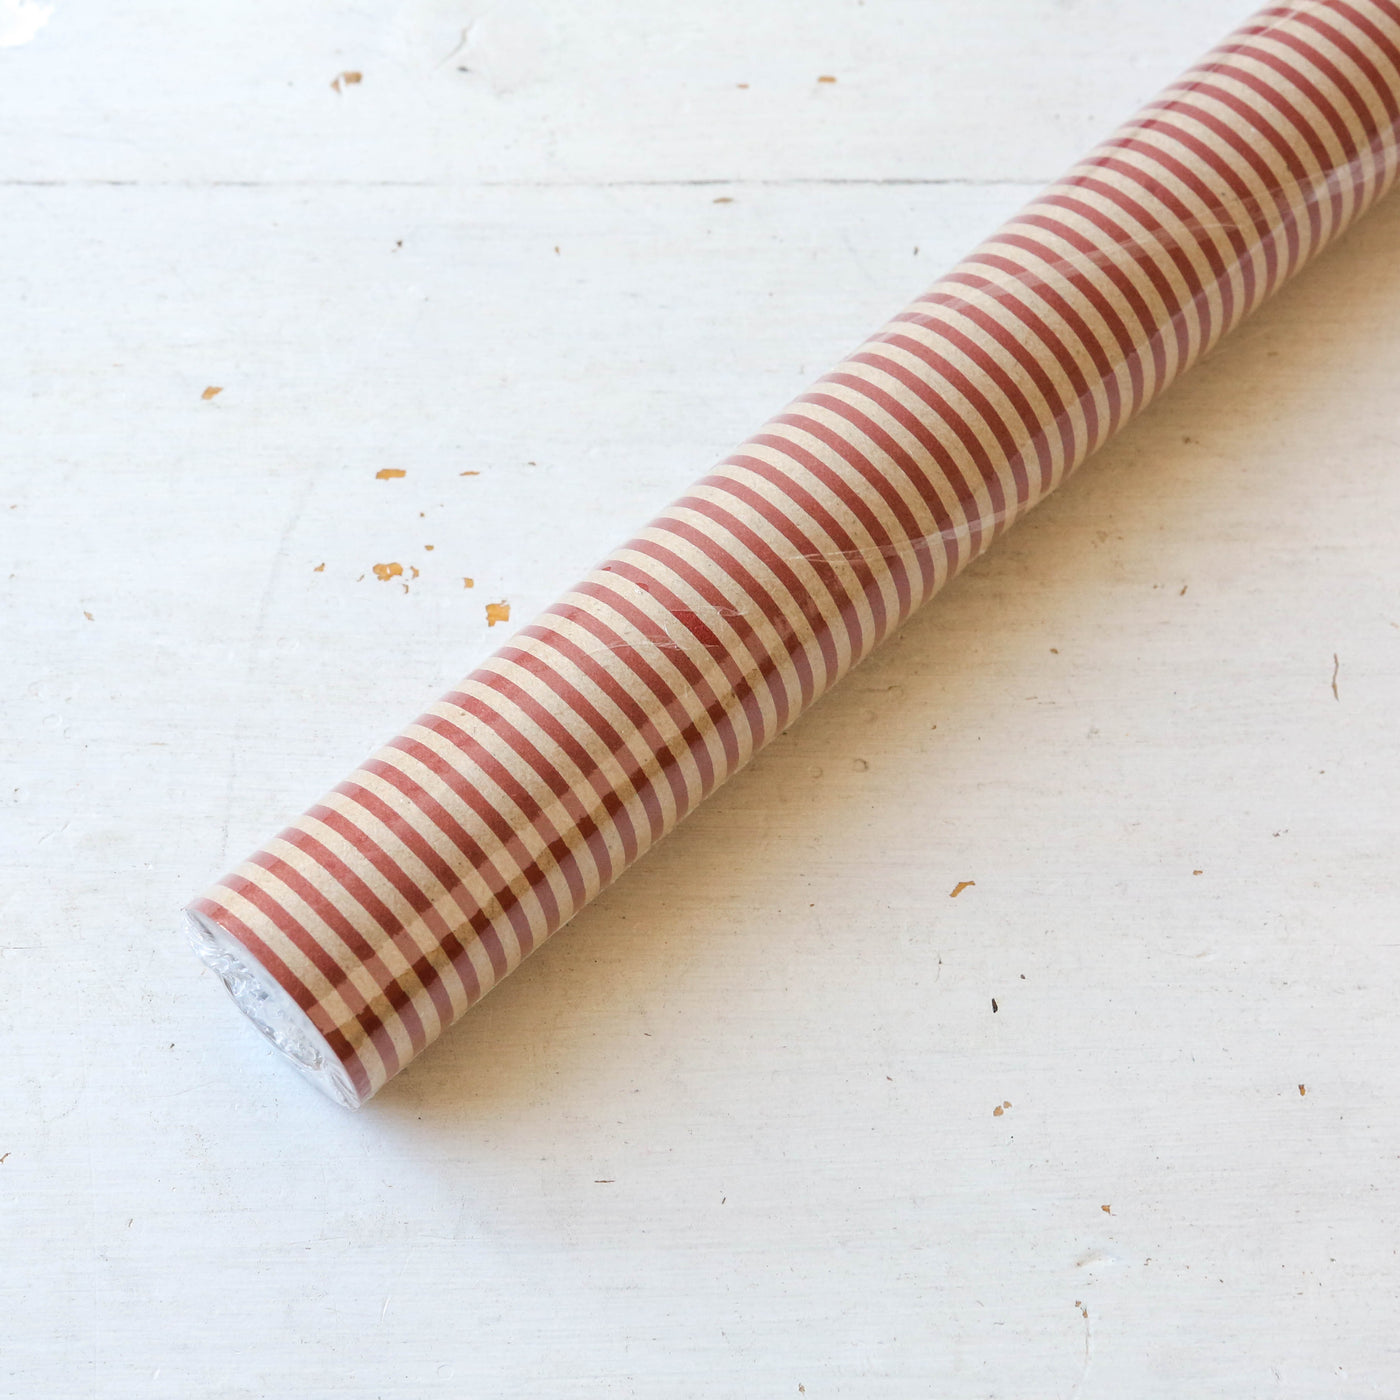 Recycled Paper Gift Wrap Roll